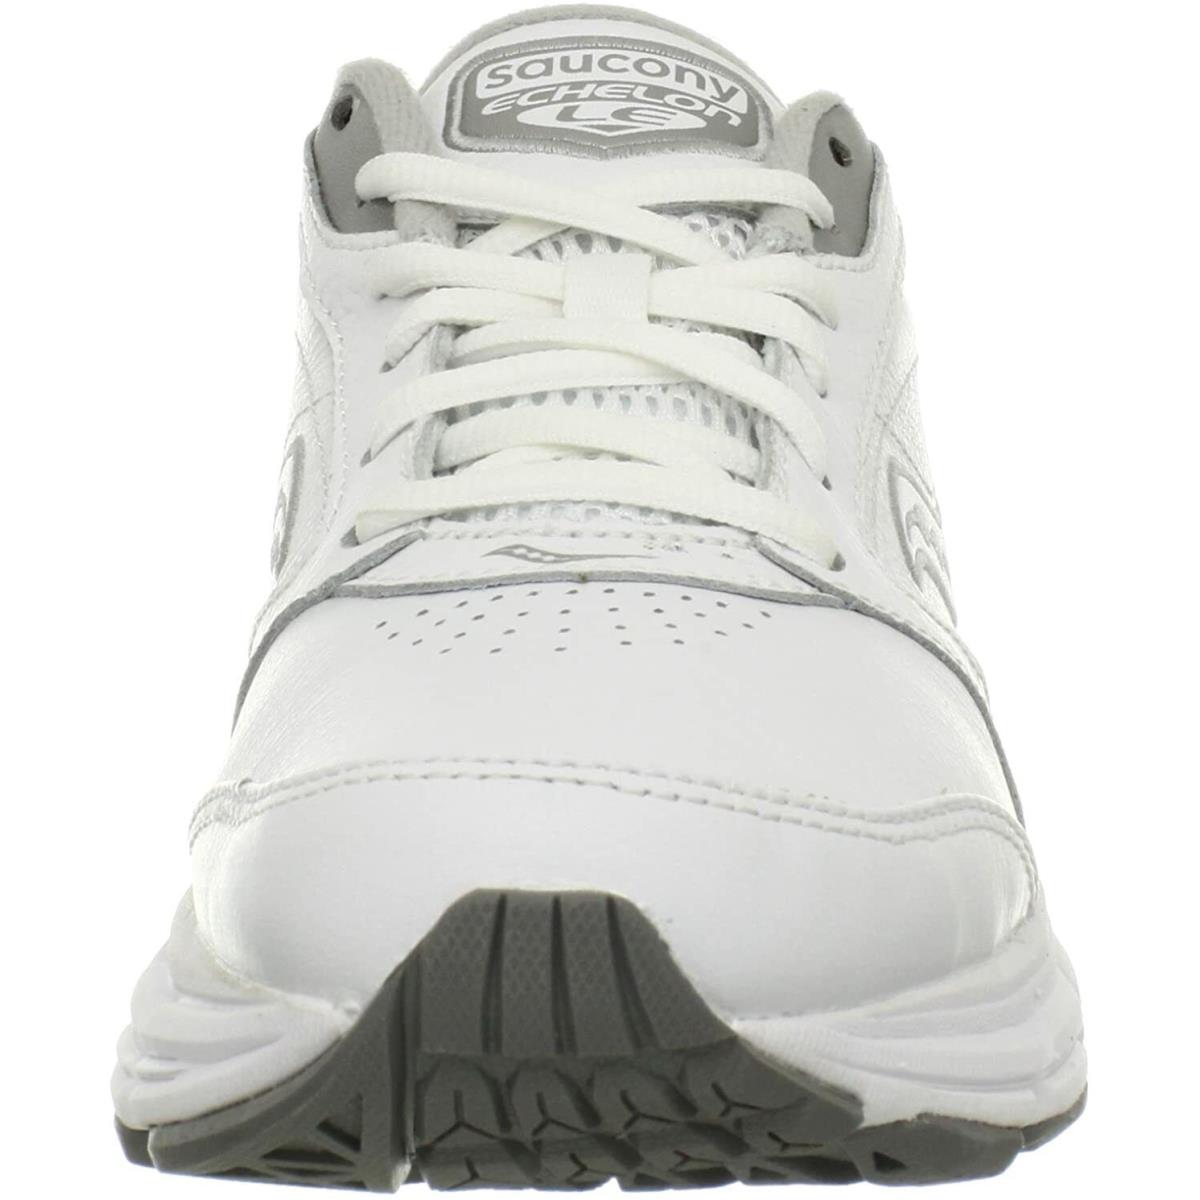 Saucony shoes  - White 0